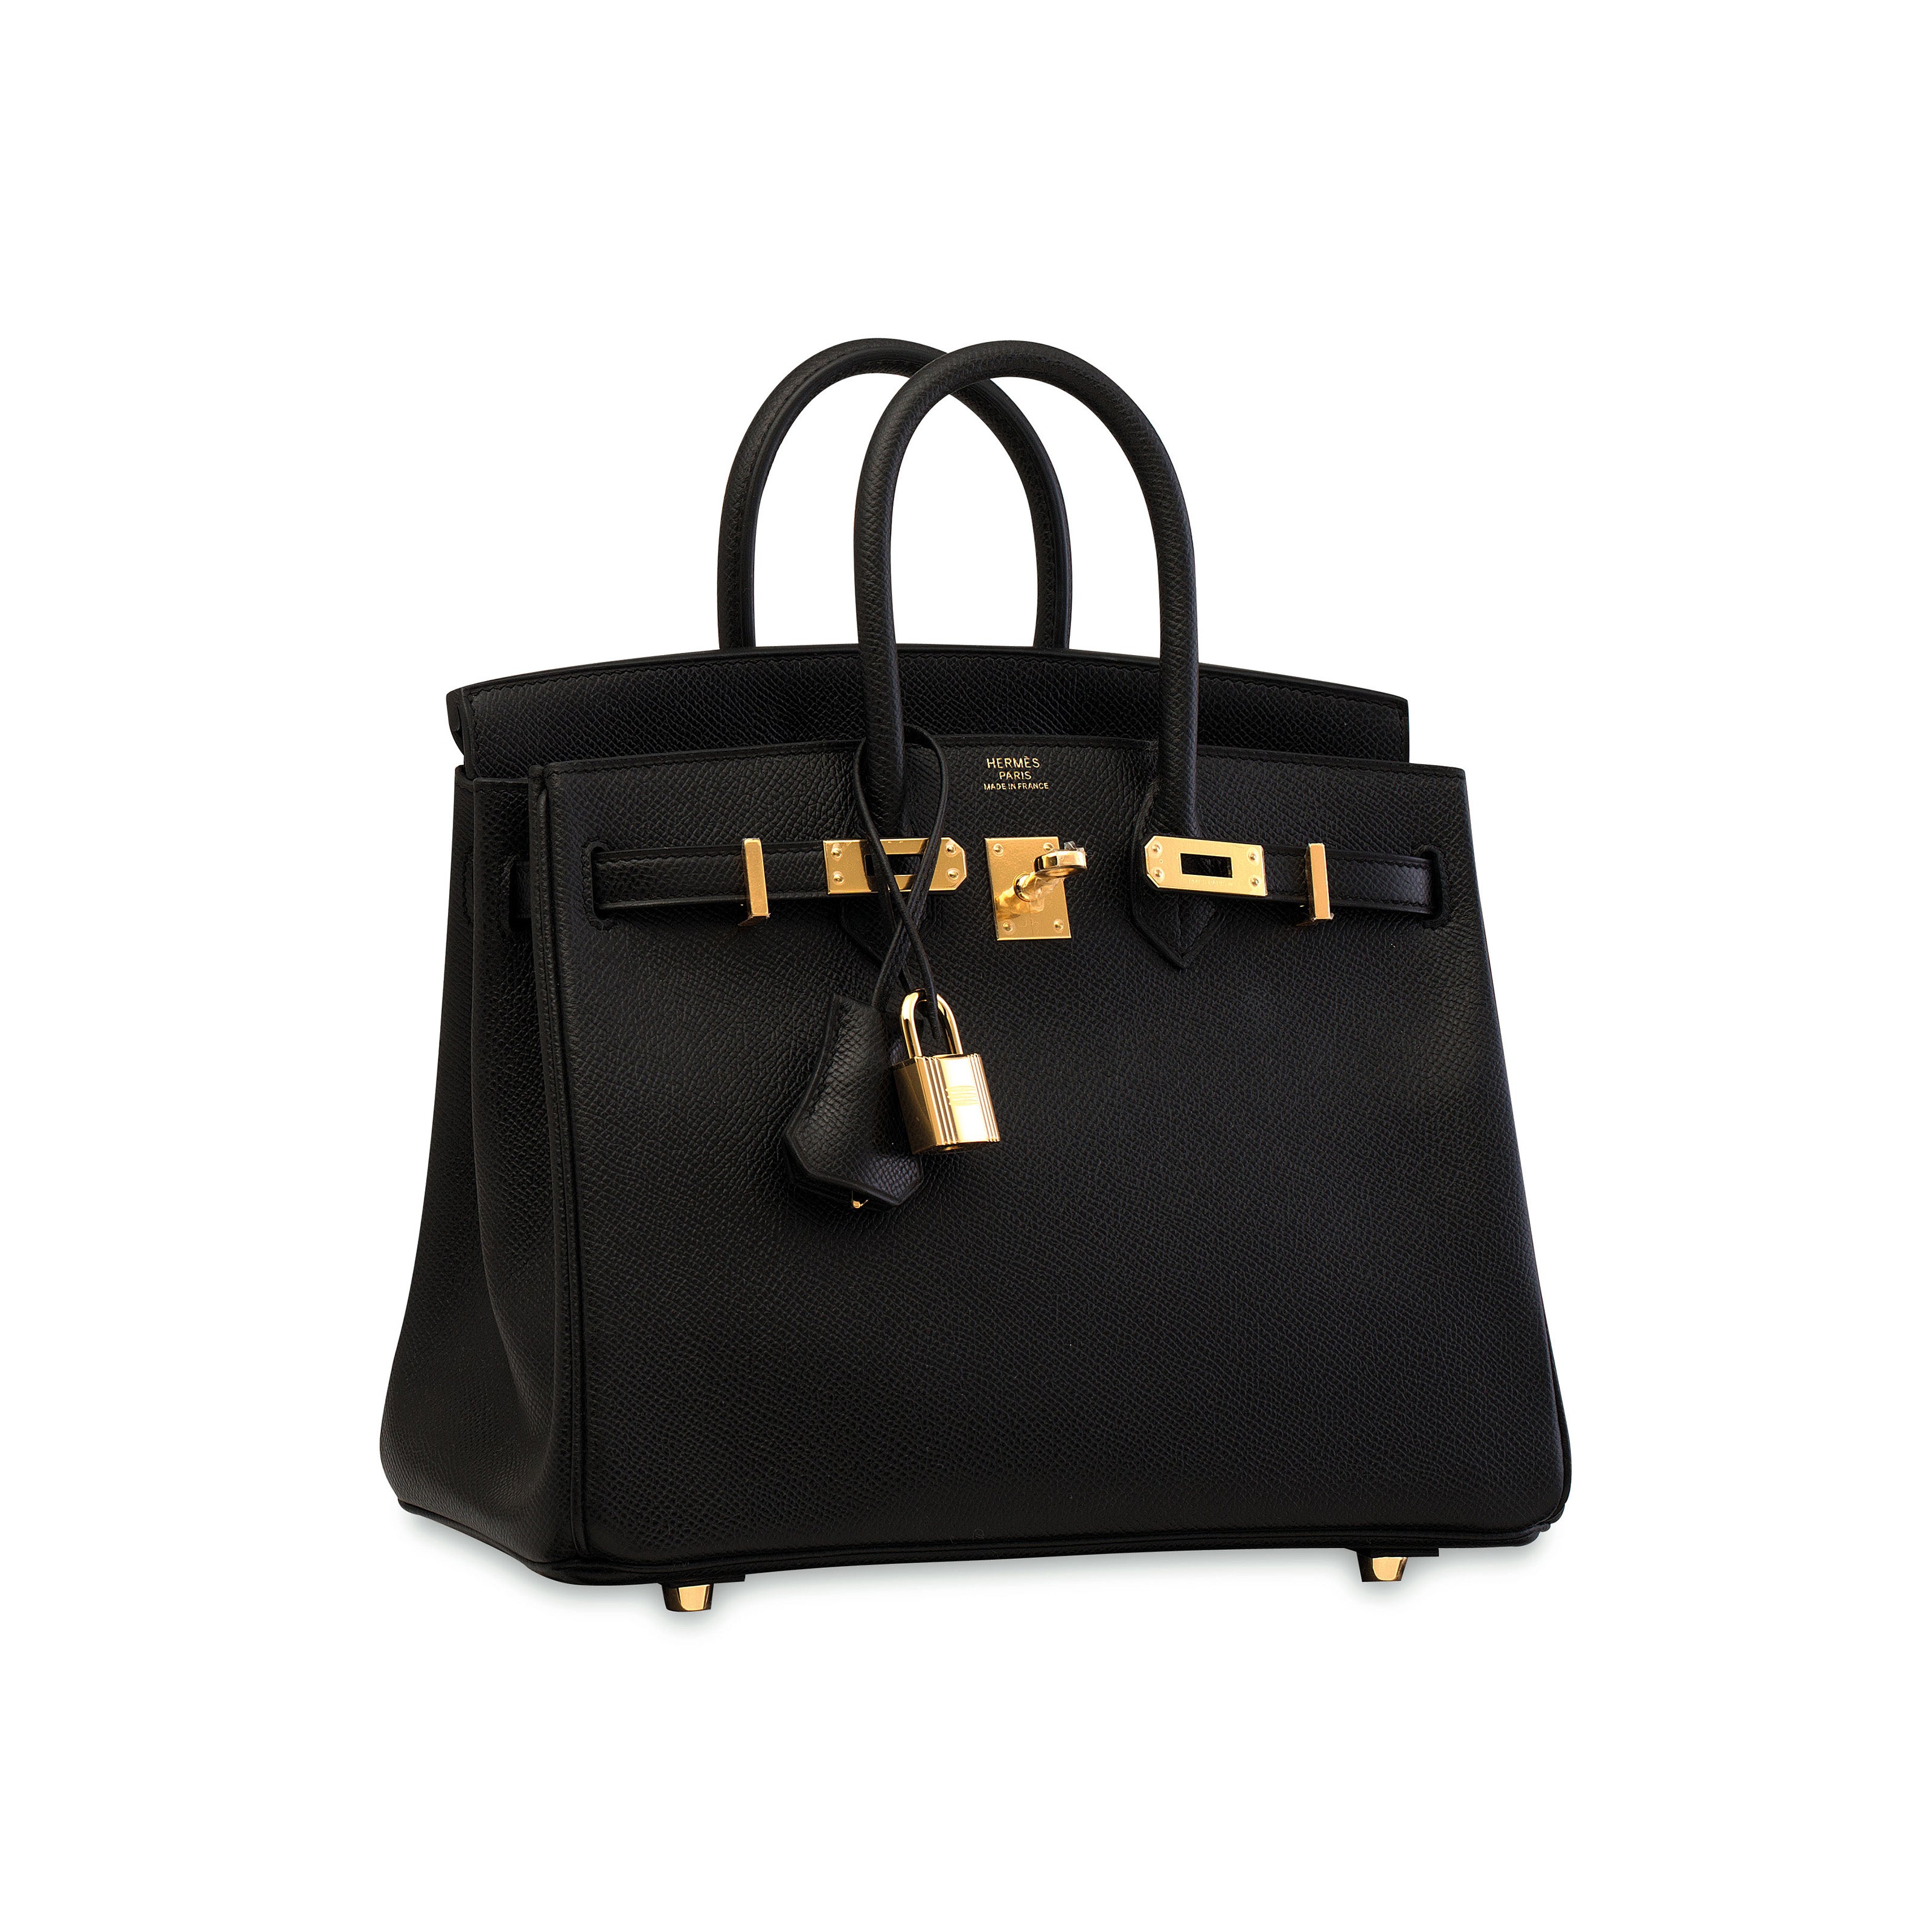 REAL 1:1 HAND-STITCHED HERMES KELLY 25 EPSOM BLACK PHW AND Horse